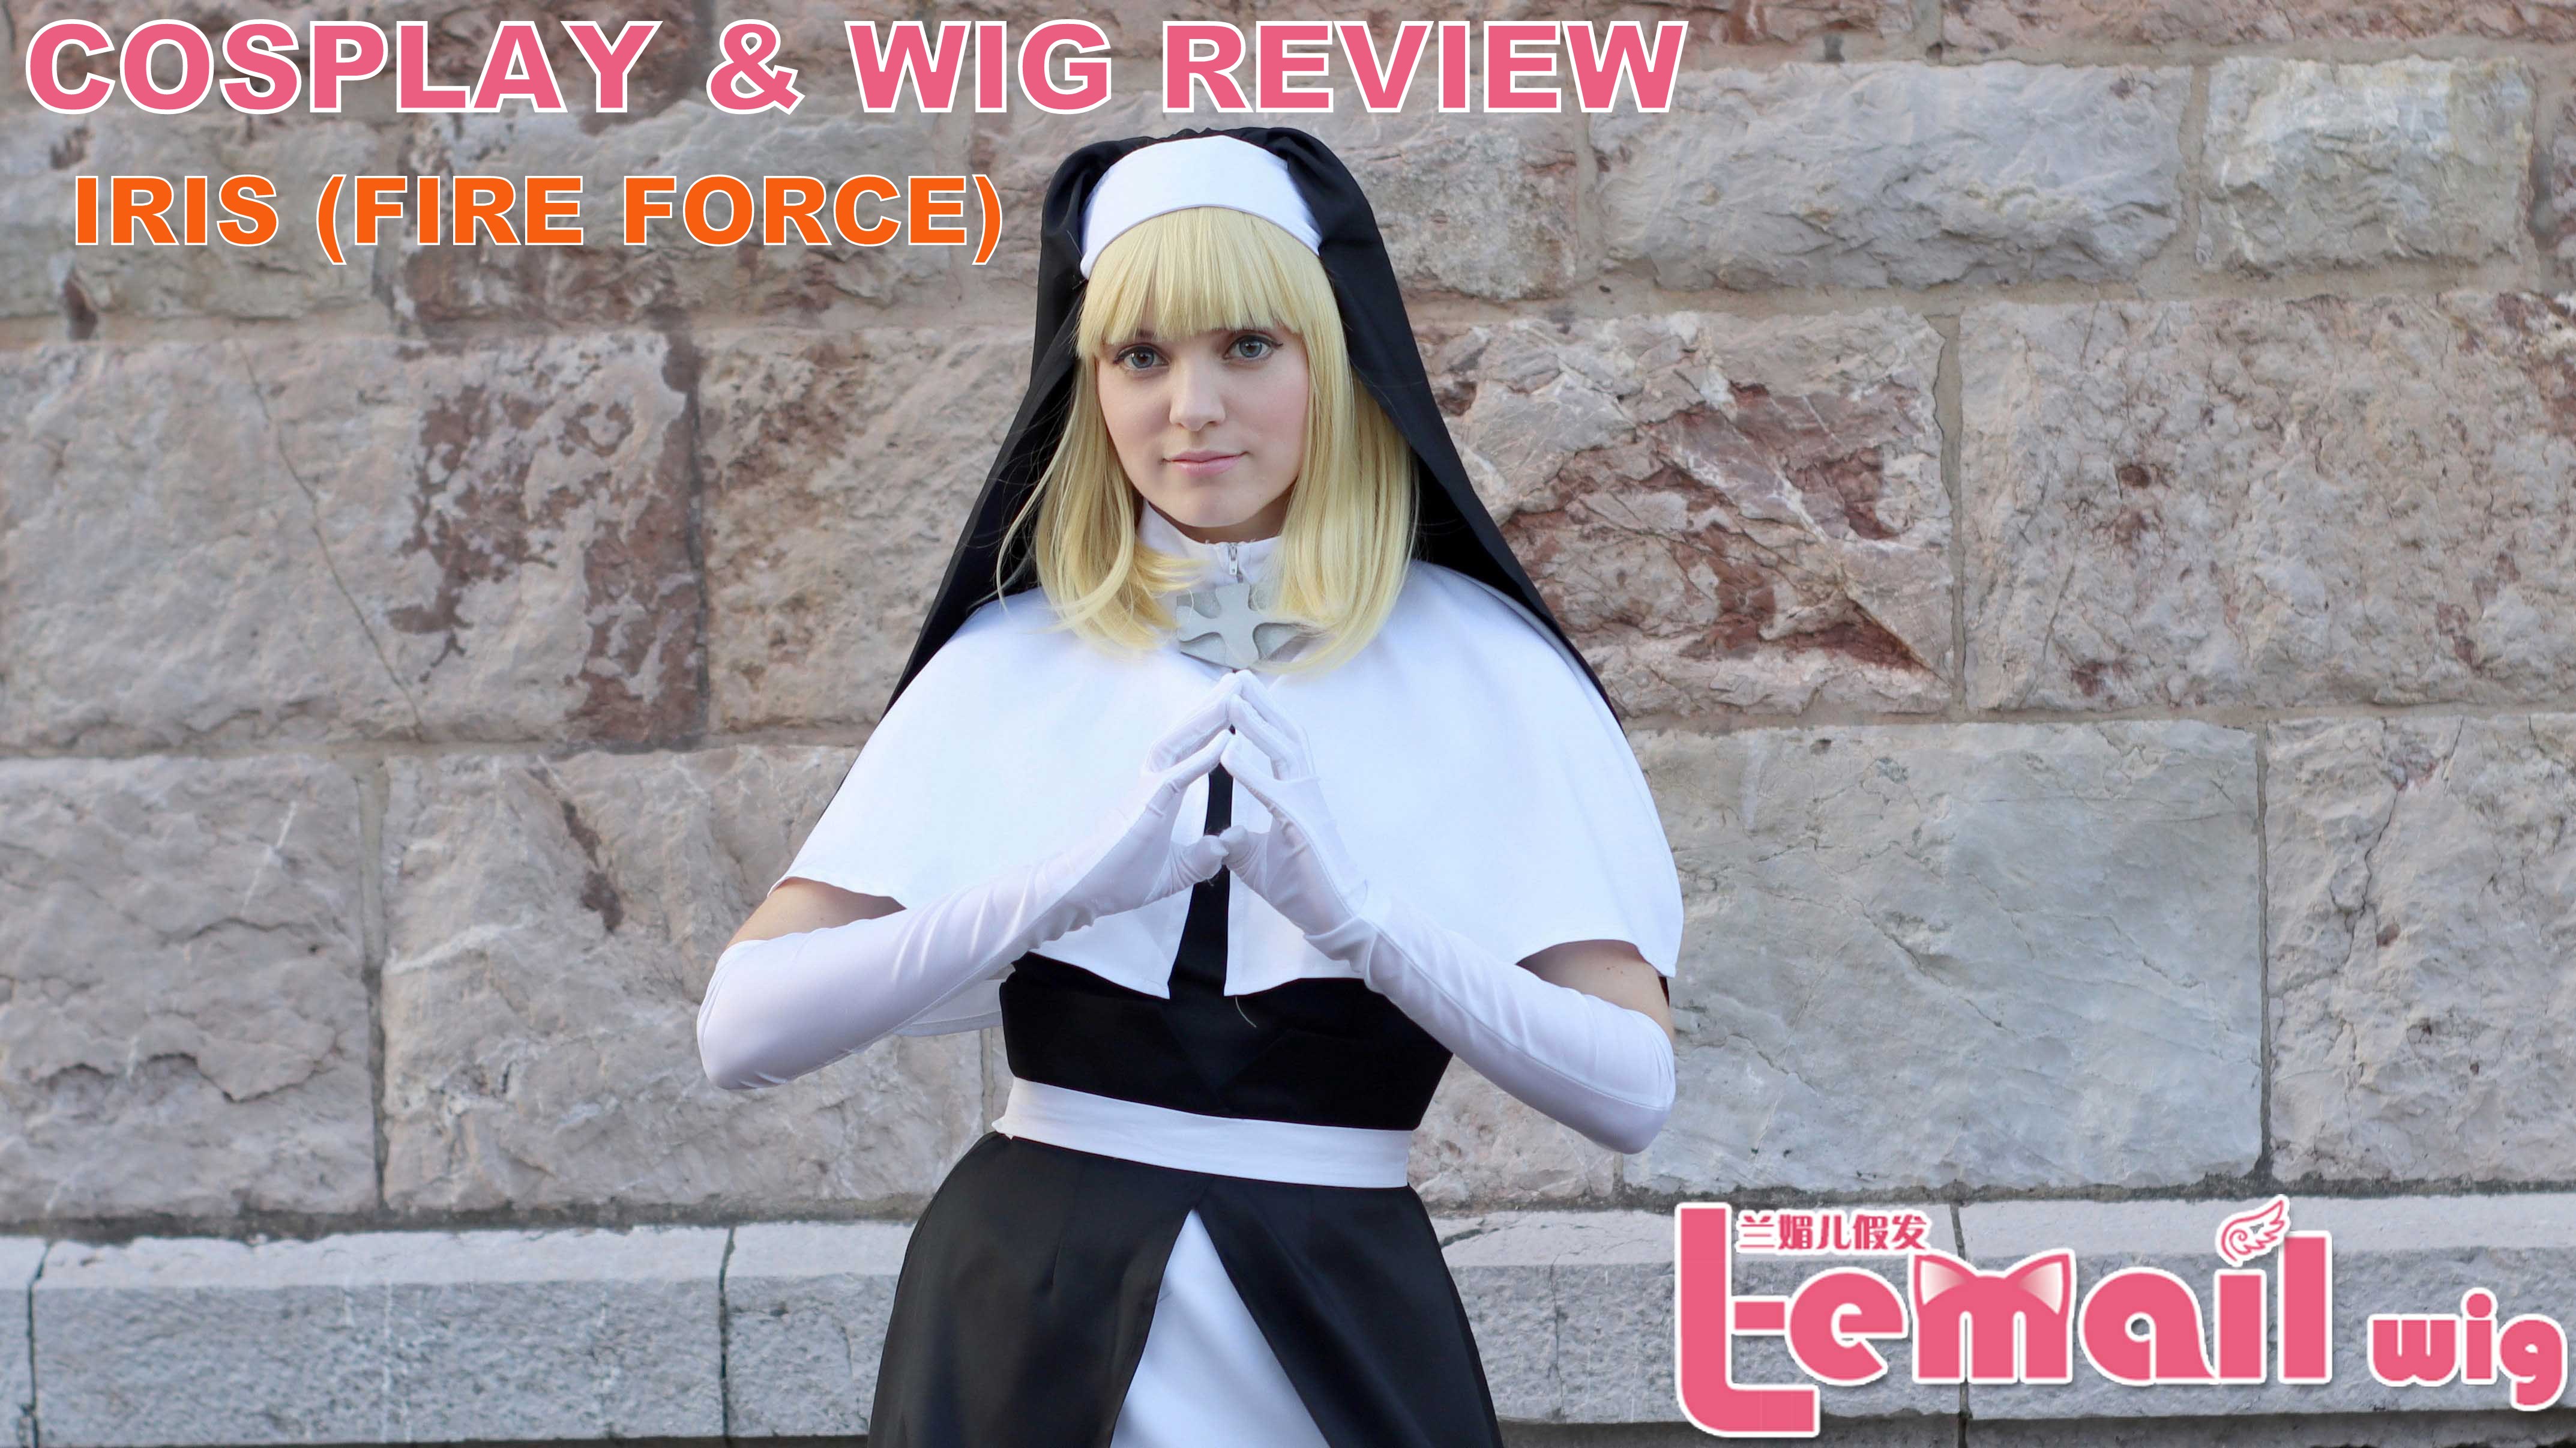 Cosplay & wig review: Iris (Fire Force) costume & wig from L-email wigs